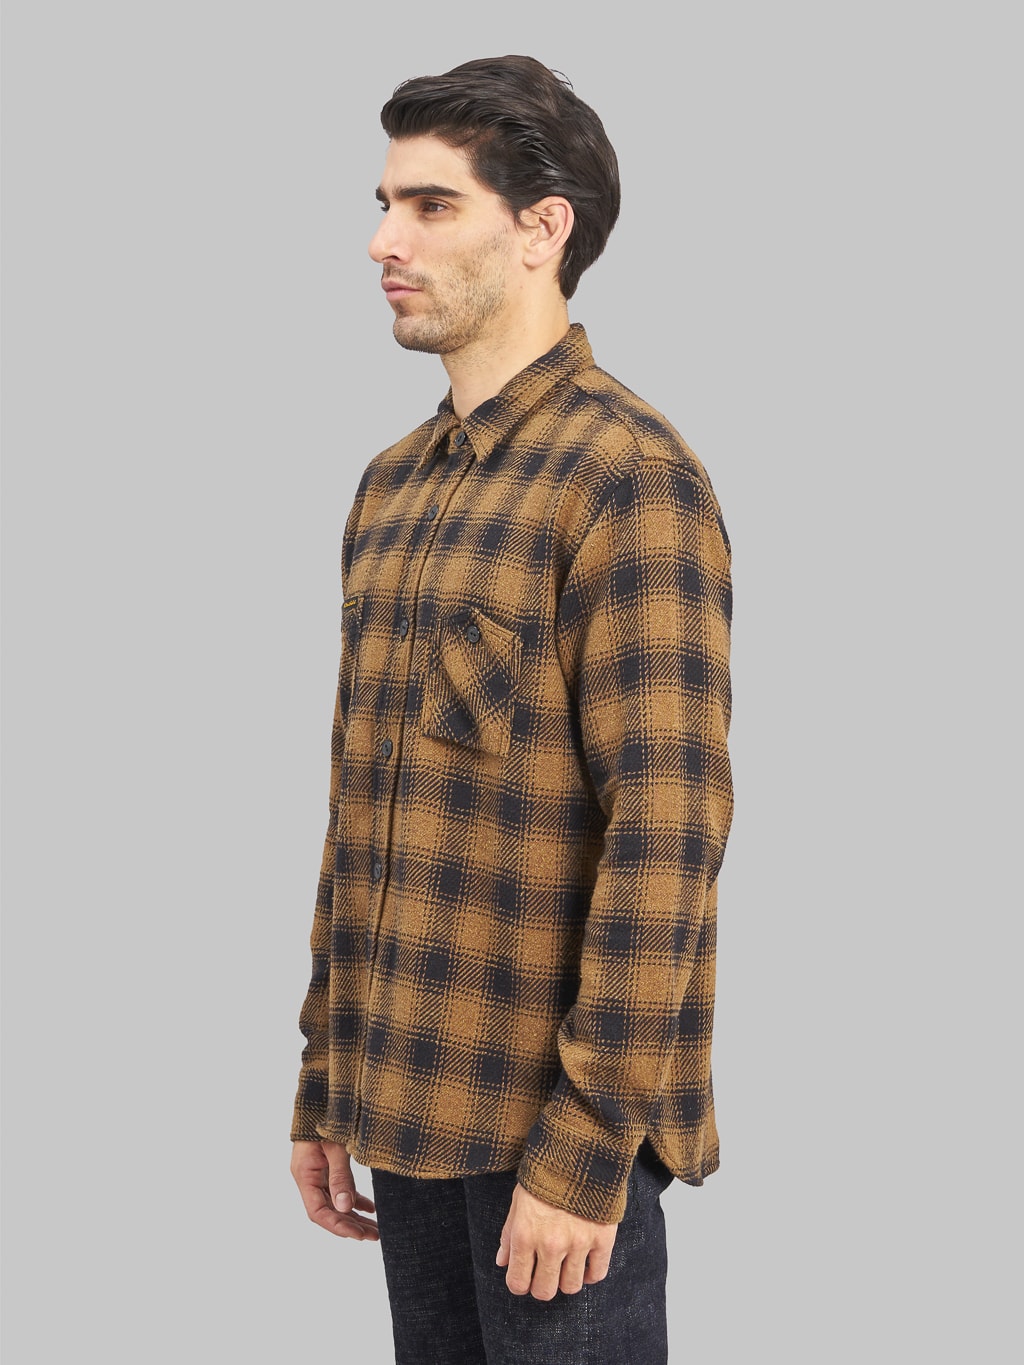 The Strike Gold SGS2203 Recycled Cotton Flannel Mixed Nep Check Work Shirt Brown